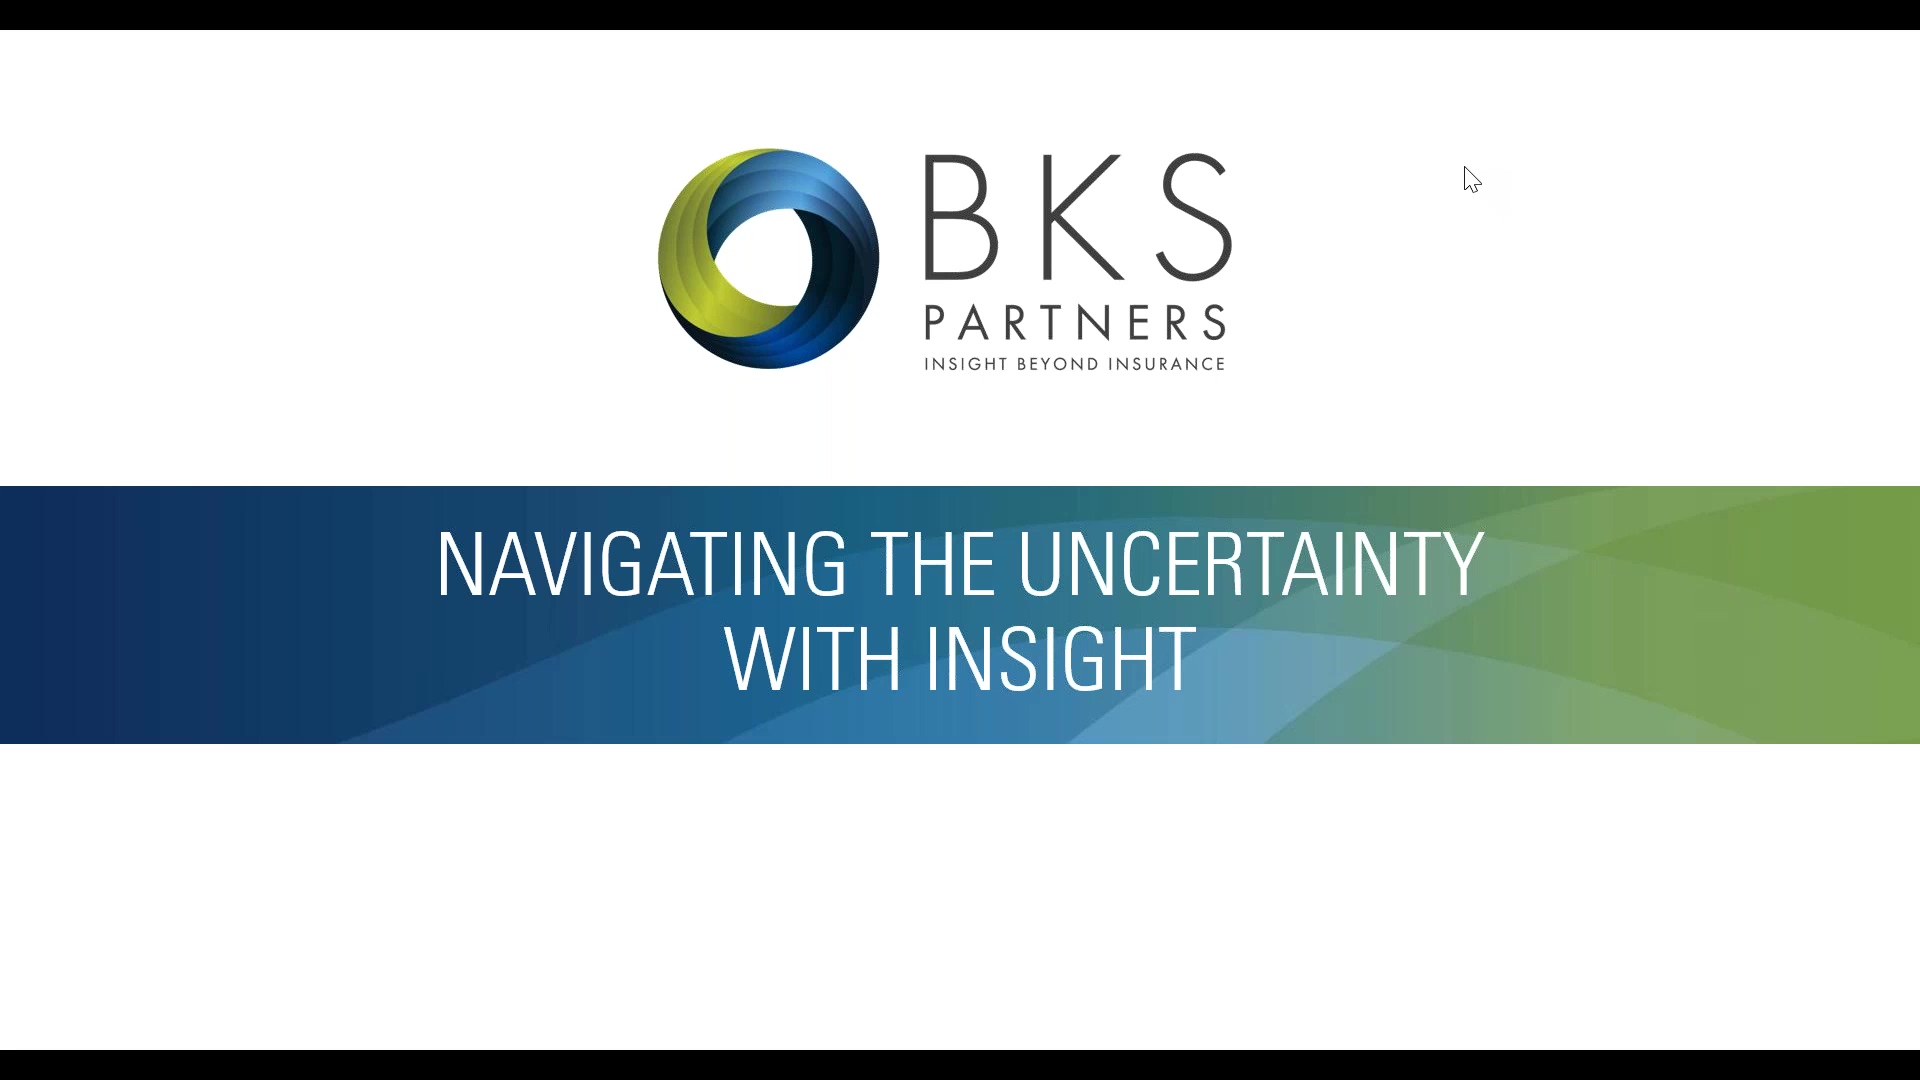 Navigating the Uncertainty with Insight - P&C Market Outlook